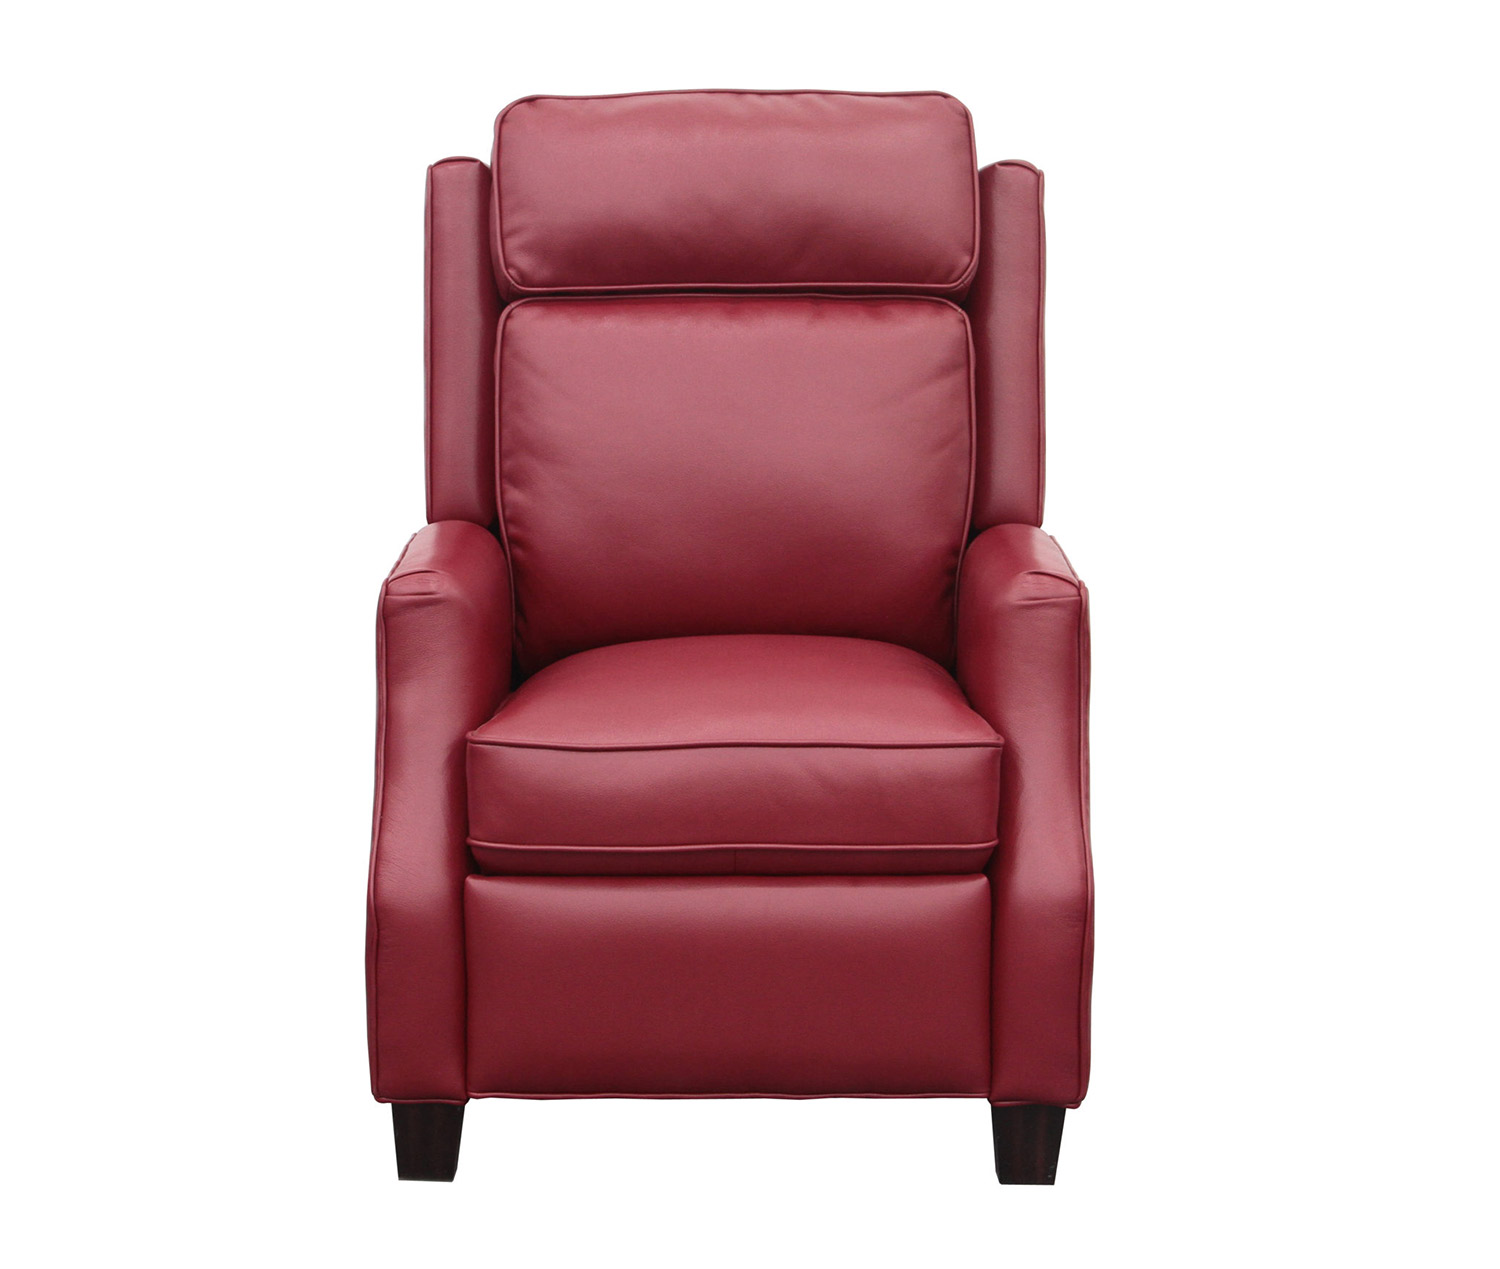 Barcalounger Nixon Recliner Chair - Blanche Fire Red performance fabric